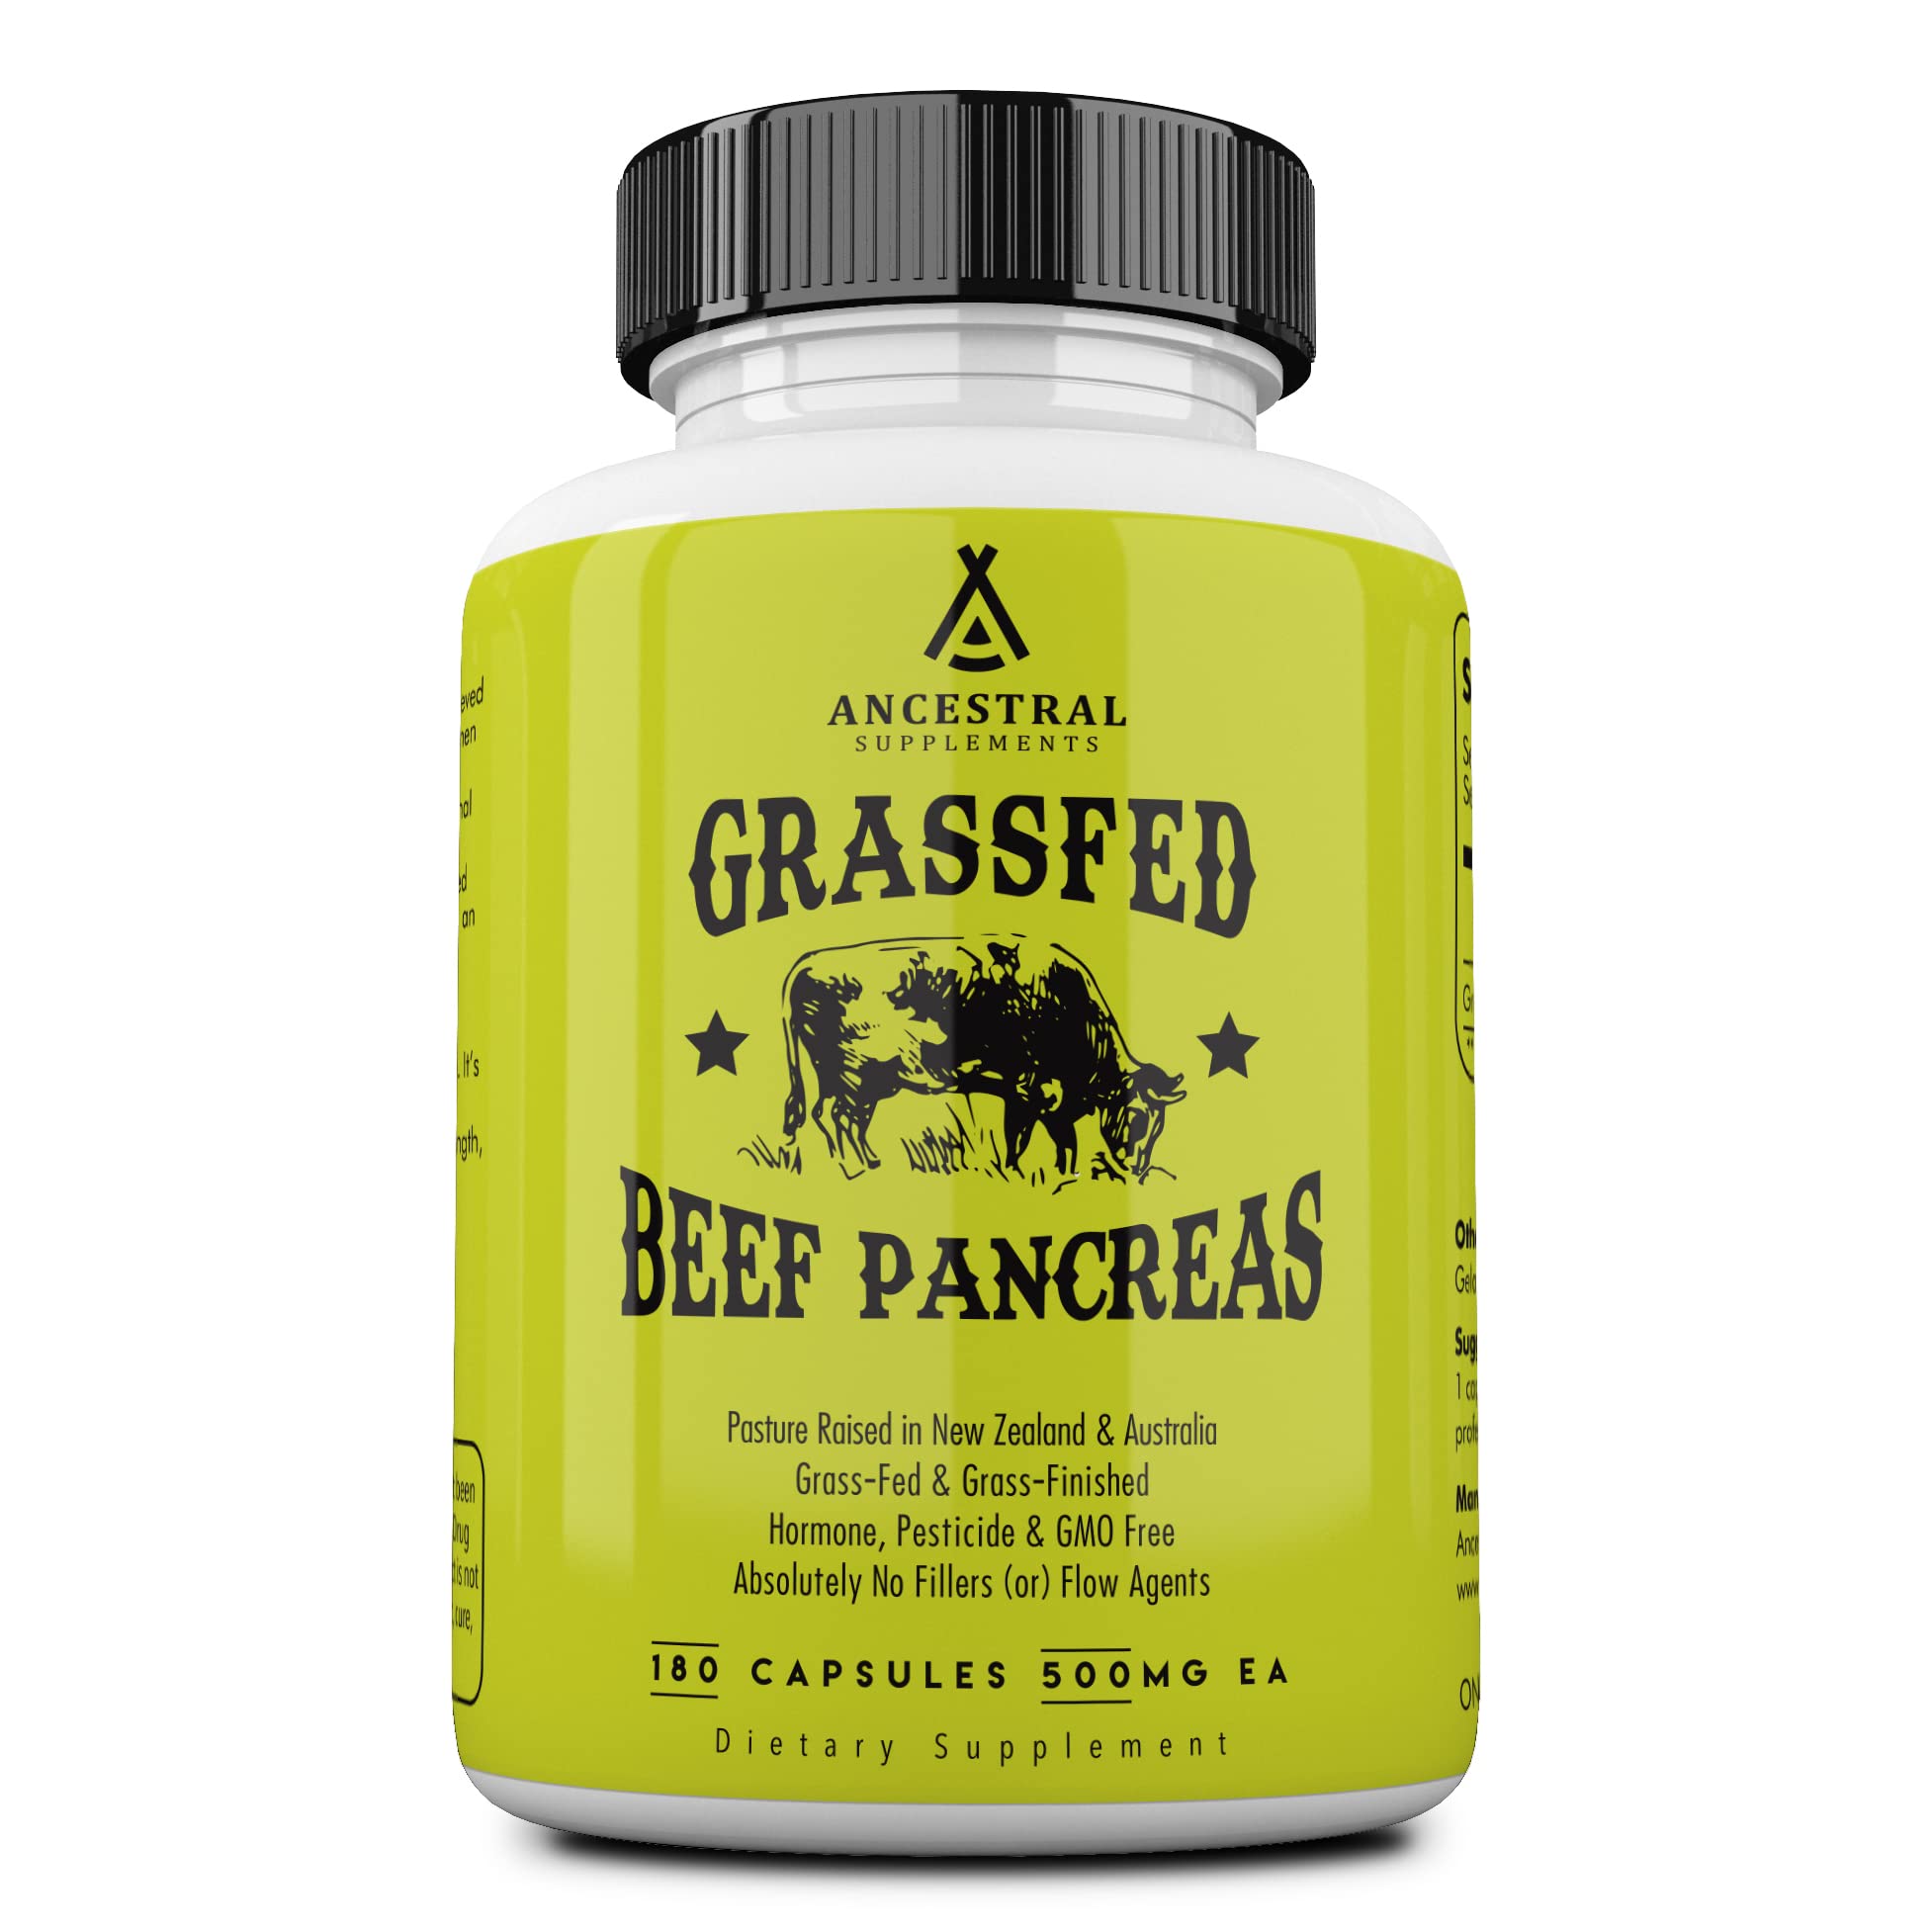 Ancestral Supplements Grass Fed Pancreas — Digestive, Proteolytic Enzymes (Including Trypsin) and Pancreatic Support (180 Capsules)